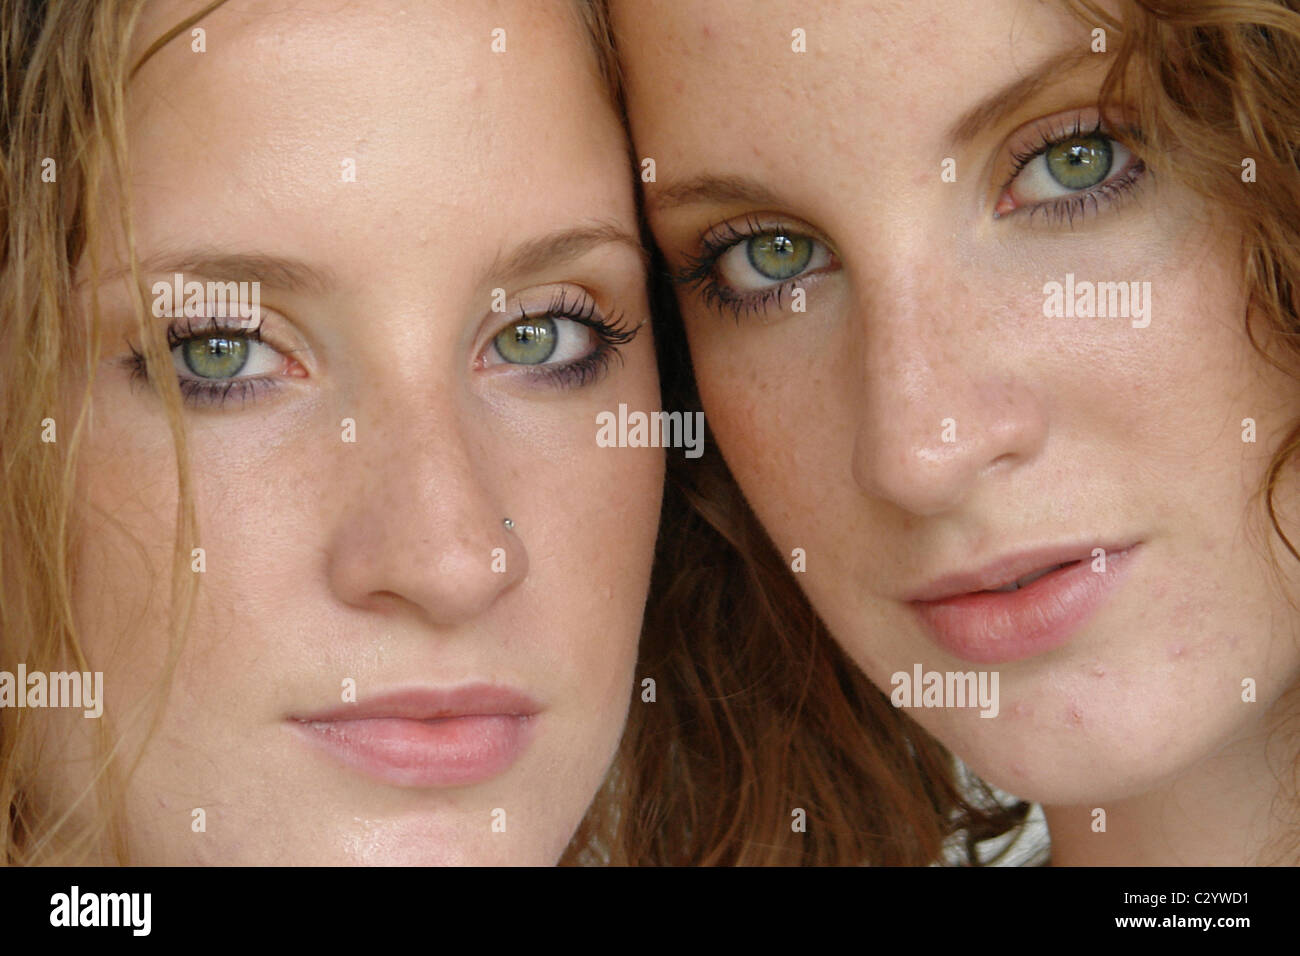 Closeup Portrait of Twin Sisters with Serious Expression Posing Cheek to Cheek Stock Photo